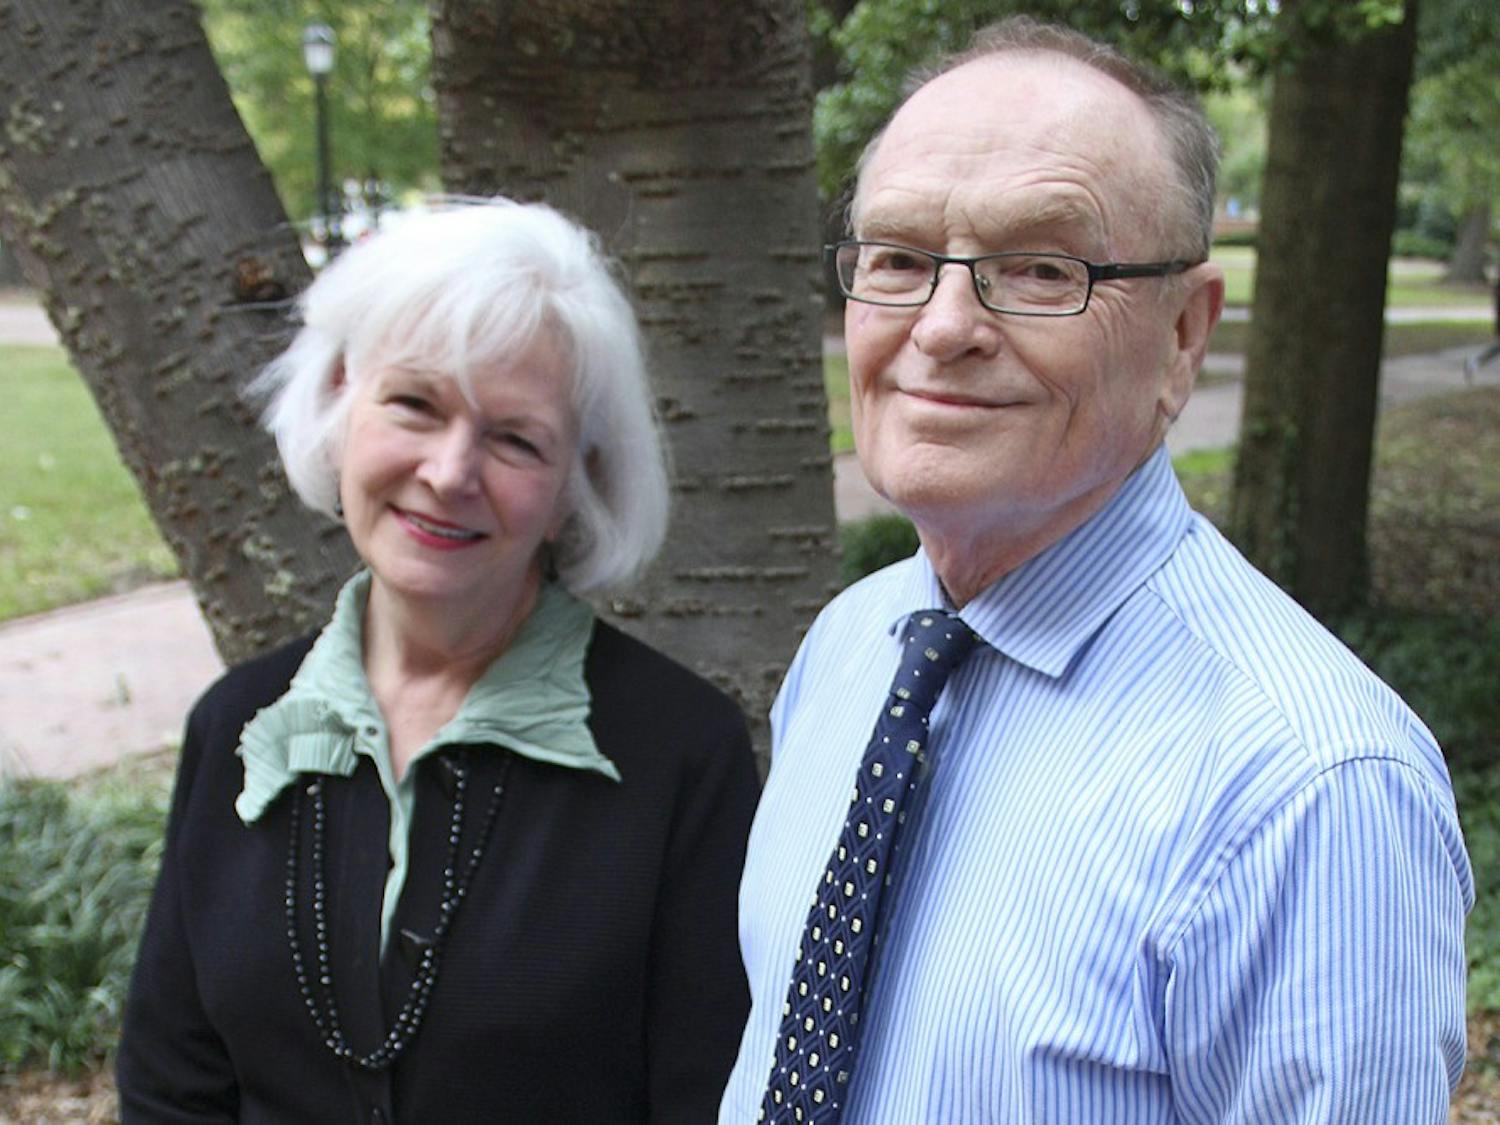 Shirley Ort and Fred Clark are the founders and directors of the Carolina Covenant financial aid program. Ort is in charge of the university's financial aid department and Clark is a professor who has been teaching here for 47 years (teaches classes on Brazilian studies).The Carolina Covenant program was founded ten years ago and is a need-based program that covers all school-related costs for the students it serves, including the cost of living. It has improved UNC's diversity and has served as a model for other financial aid programs around the country (however, Shirley pointed out that ours has been the most successful because many other schools who have tried it have dropped the program because it is so expensive). 